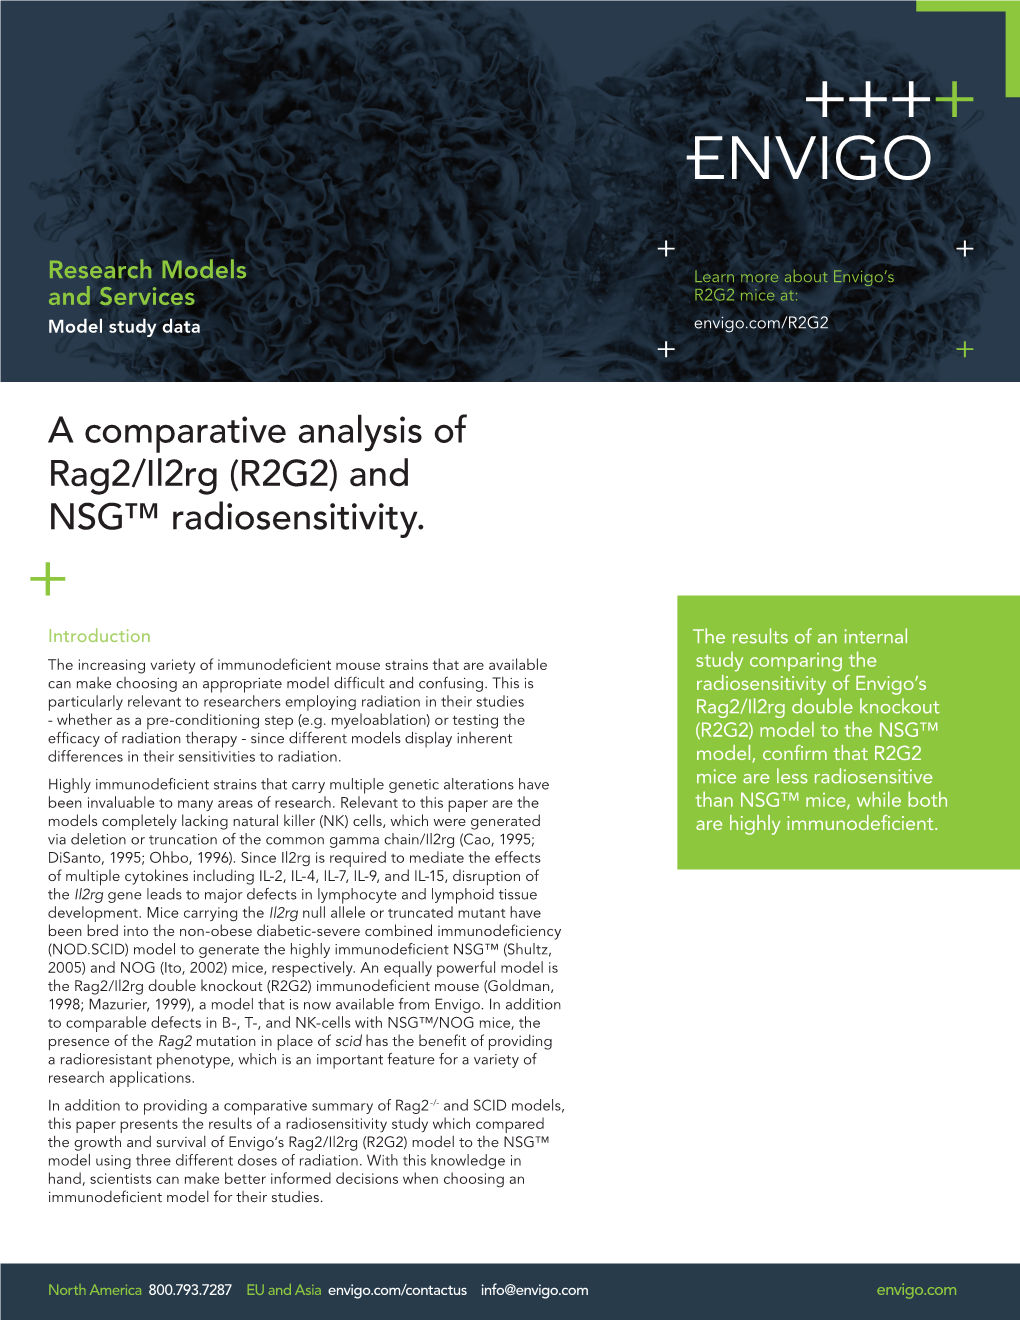 A Comparative Analysis of Rag2/Il2rg (R2G2) and NSG™ Radiosensitivity